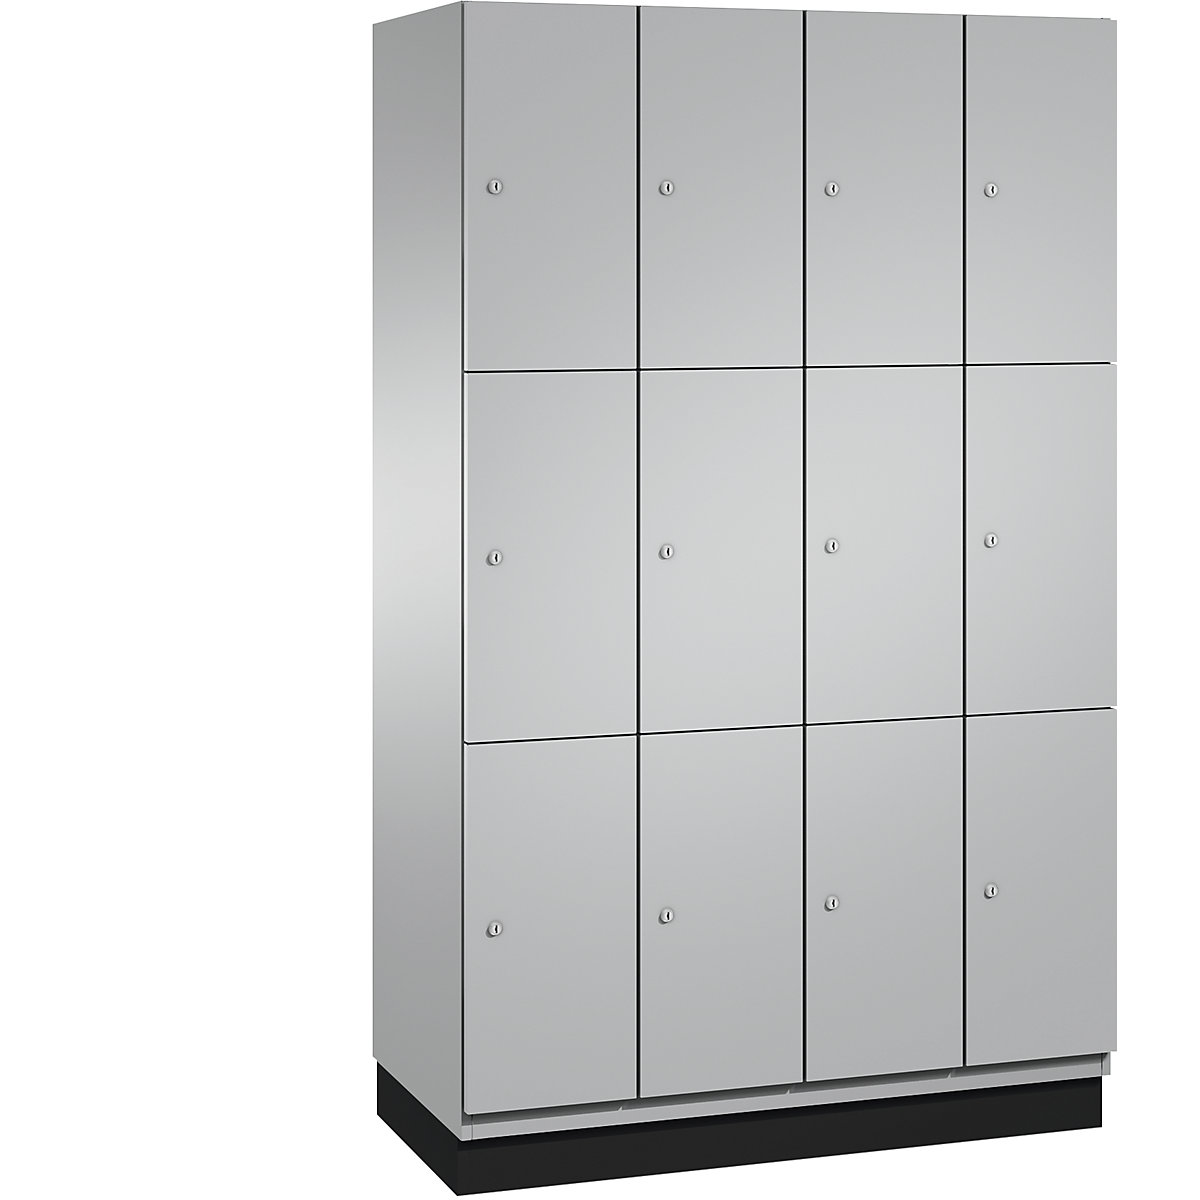 CAMBIO compartment locker with sheet steel doors – C+P, 12 compartments, width 1200 mm, body white aluminium / door white aluminium, compartment height 616.6 mm-1